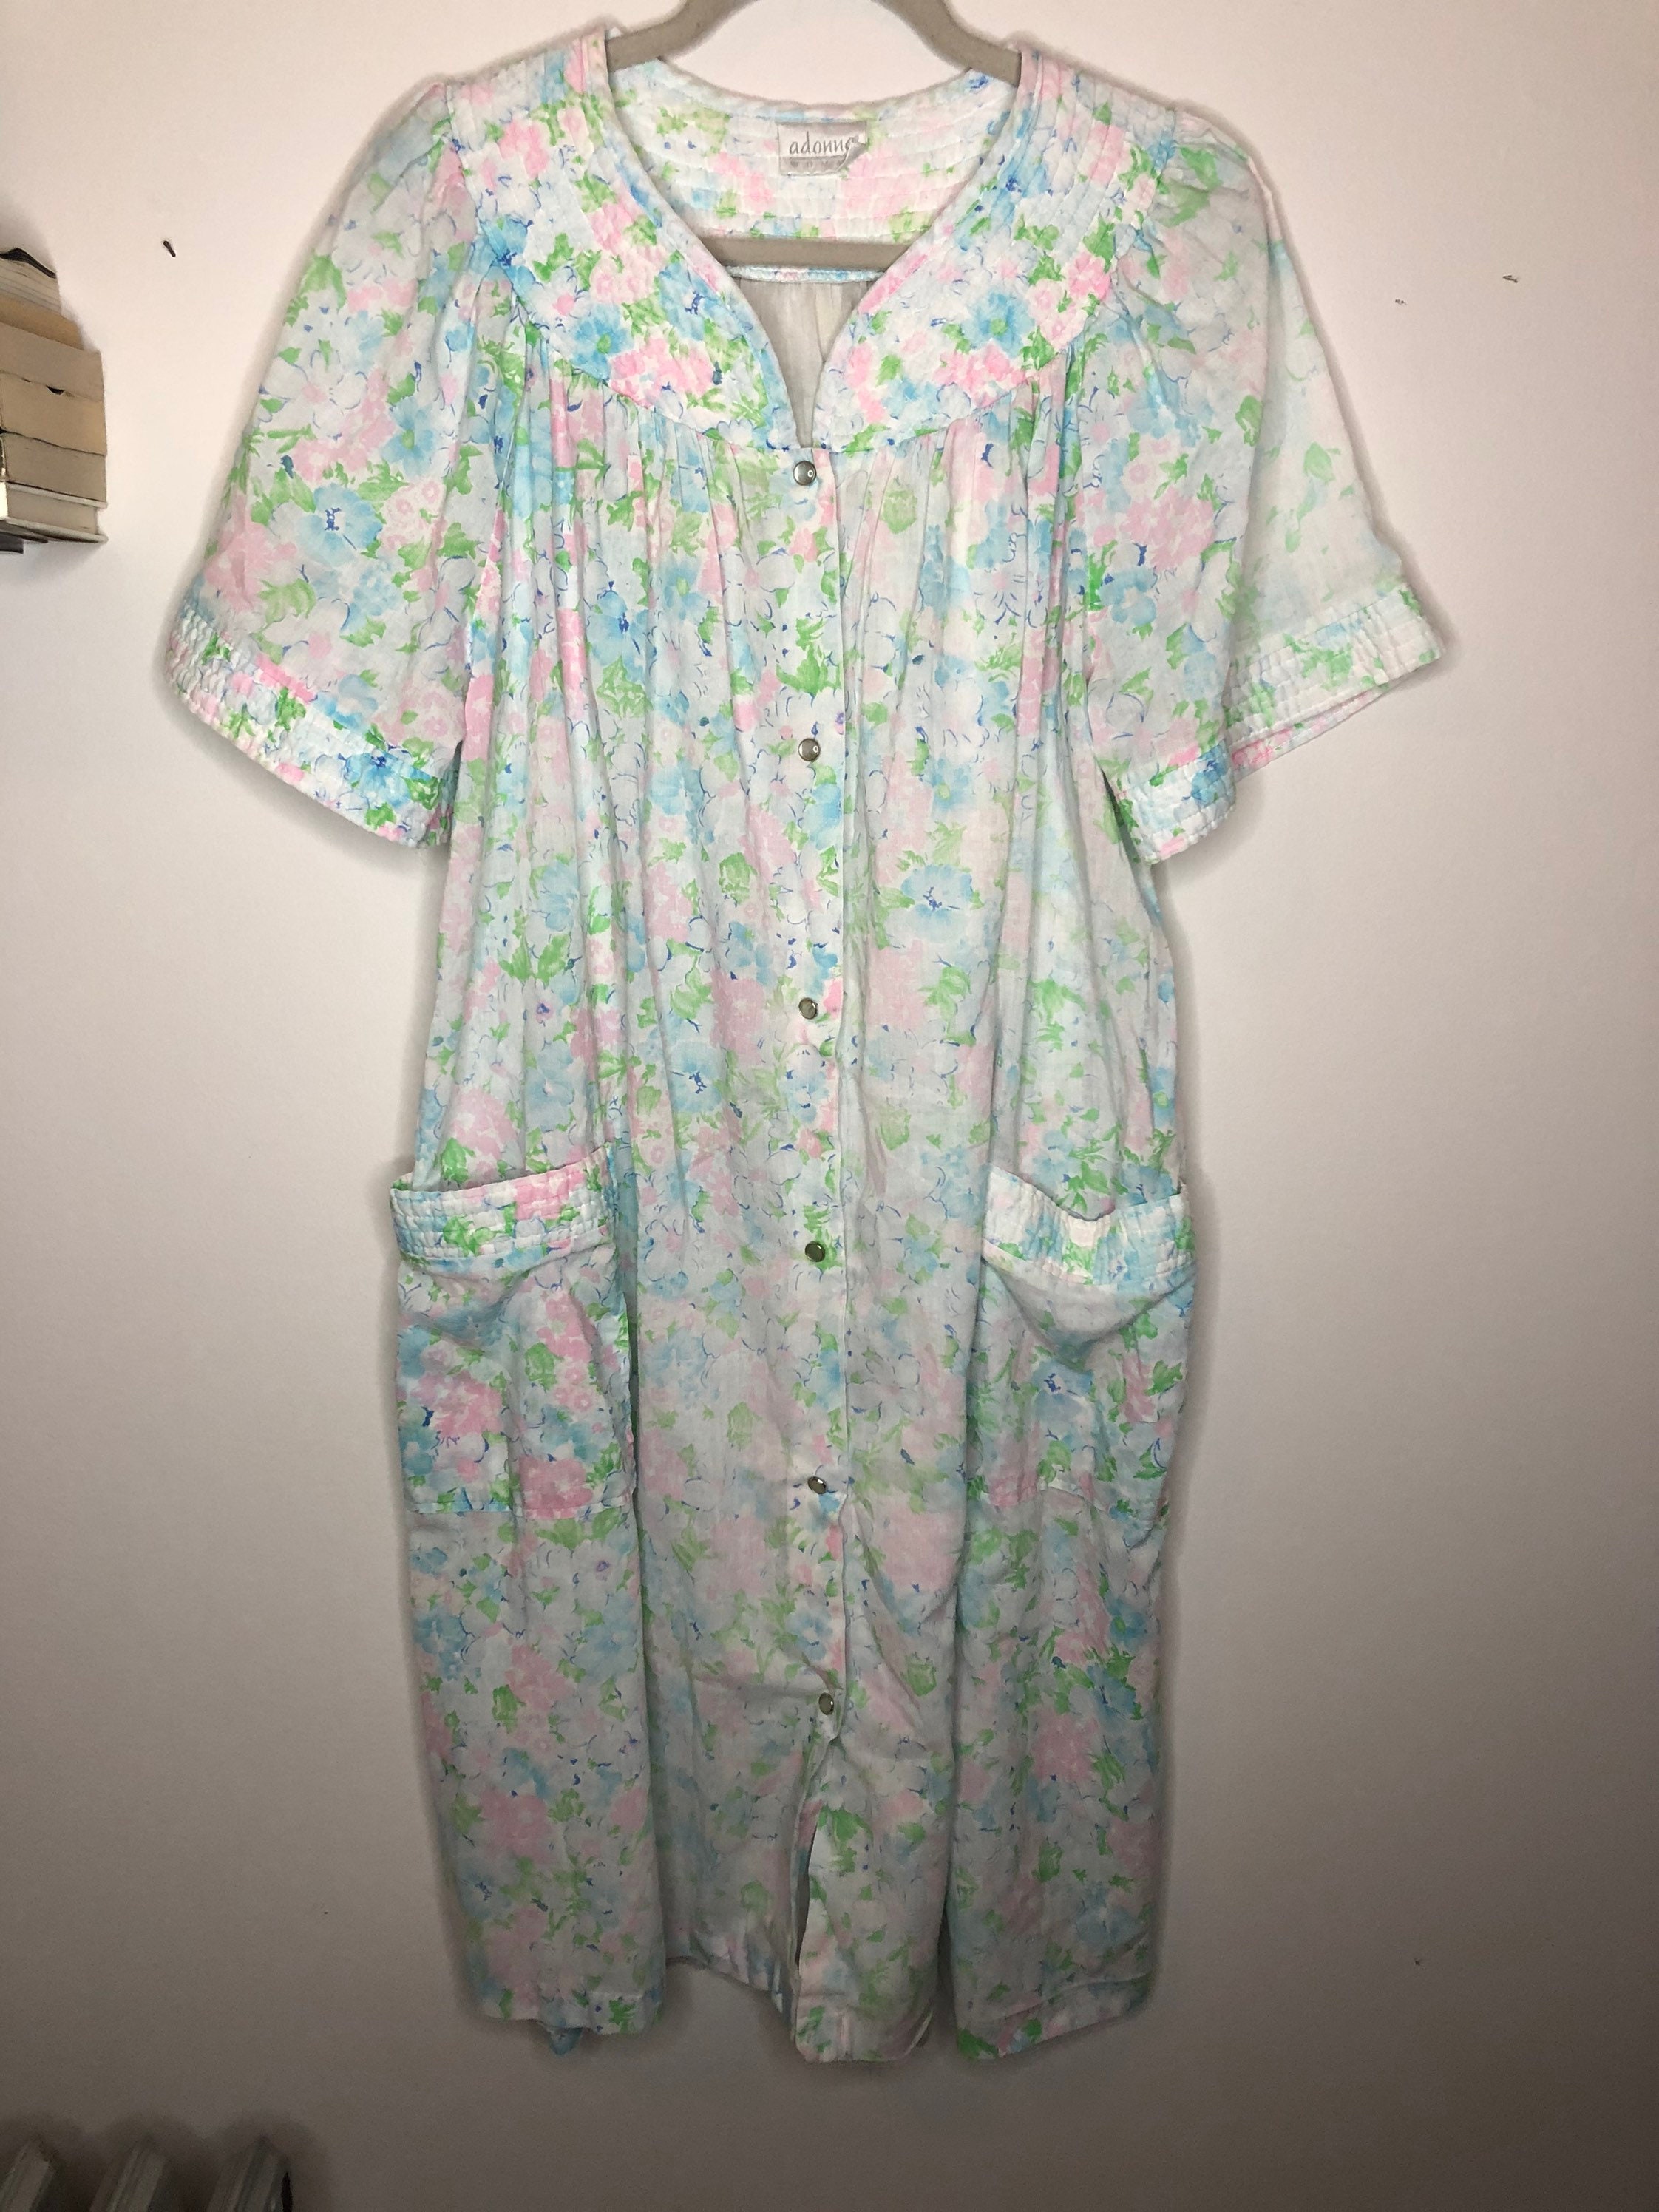 Vintage floral nightgown with pearl snaps down front. pink | Etsy